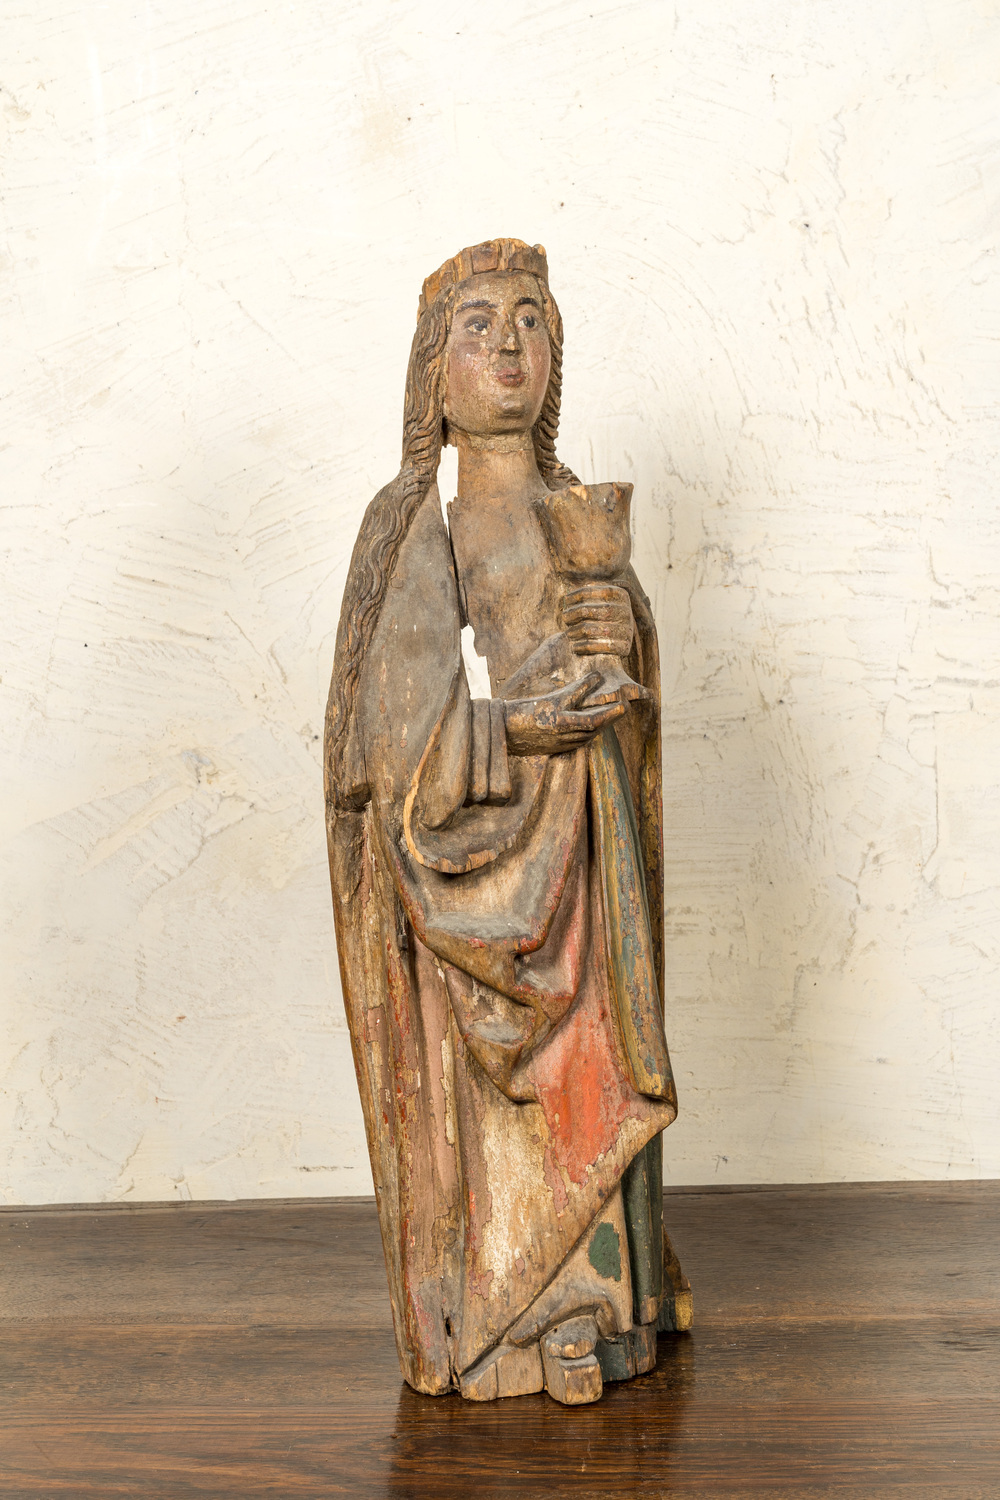 A German polychromed basswooden Saint Odilia holding a chalice, Middle-Rhein area, early 16th C.